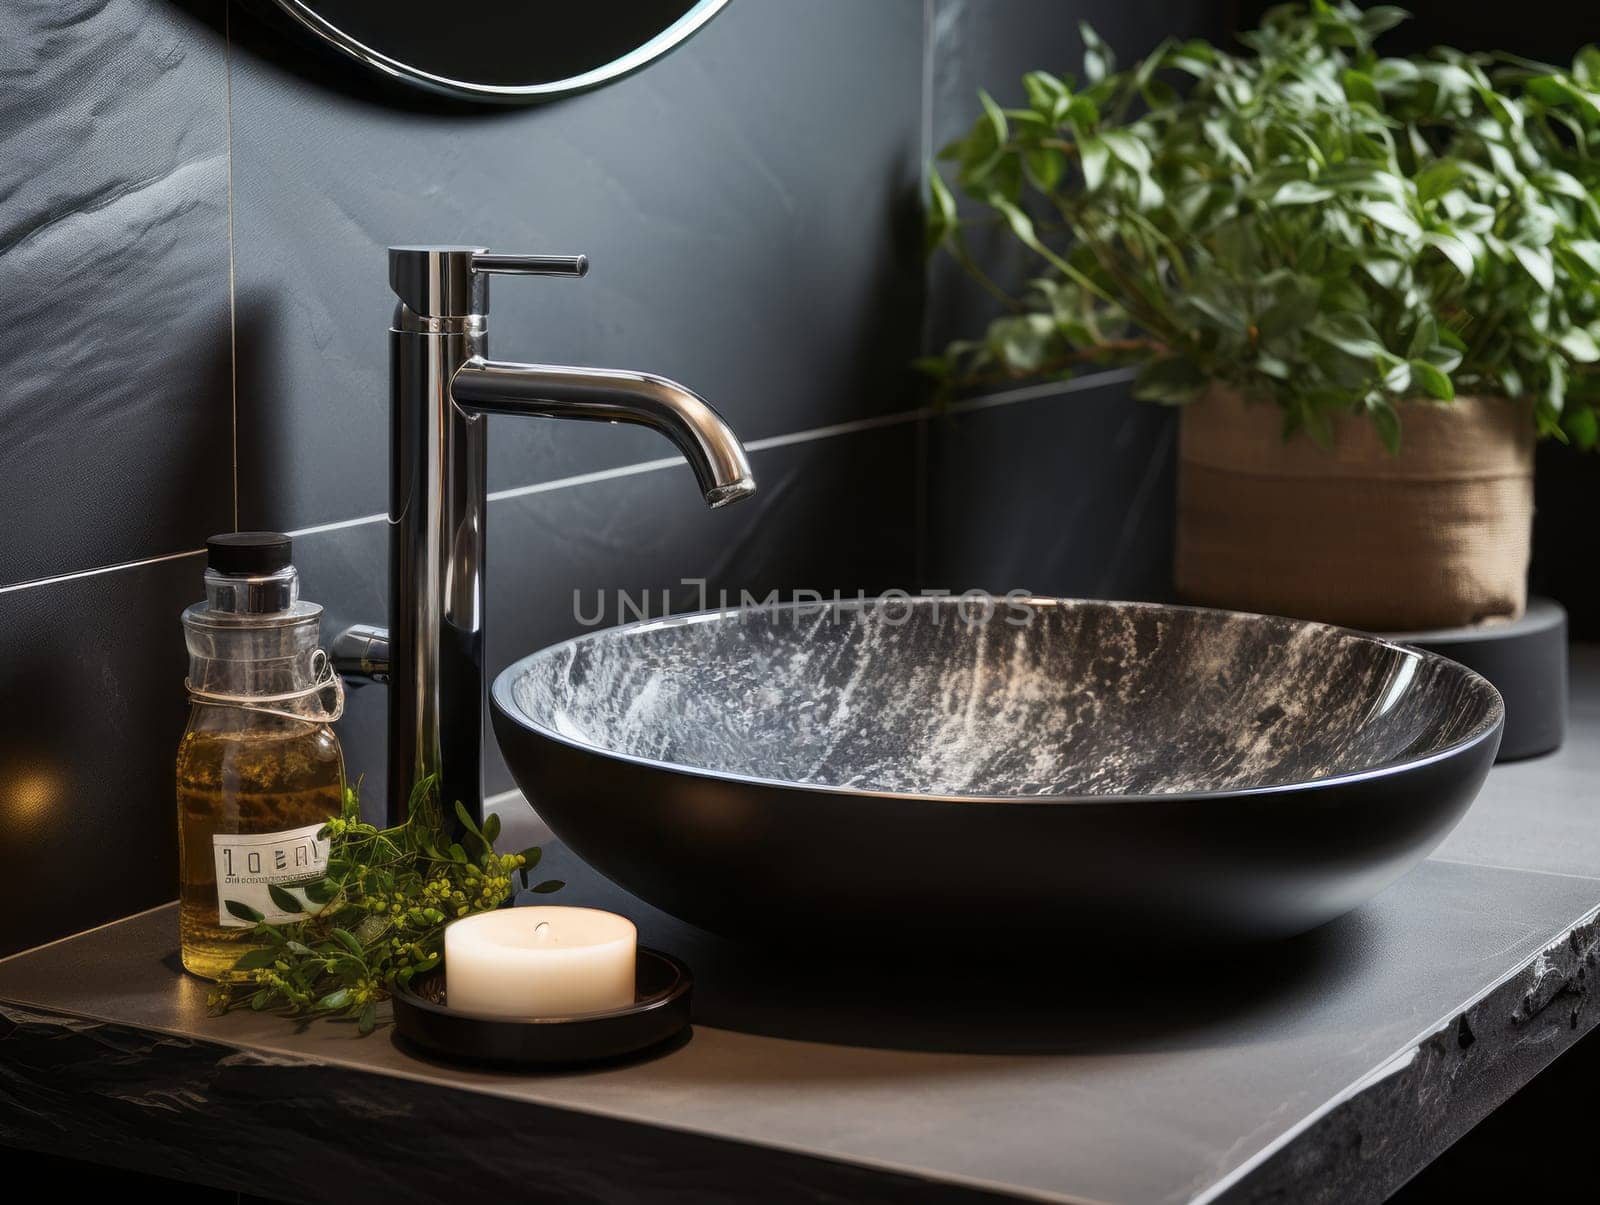 Stylish black marble vessel sink and chrome faucet. Interior design of modern bathroom...